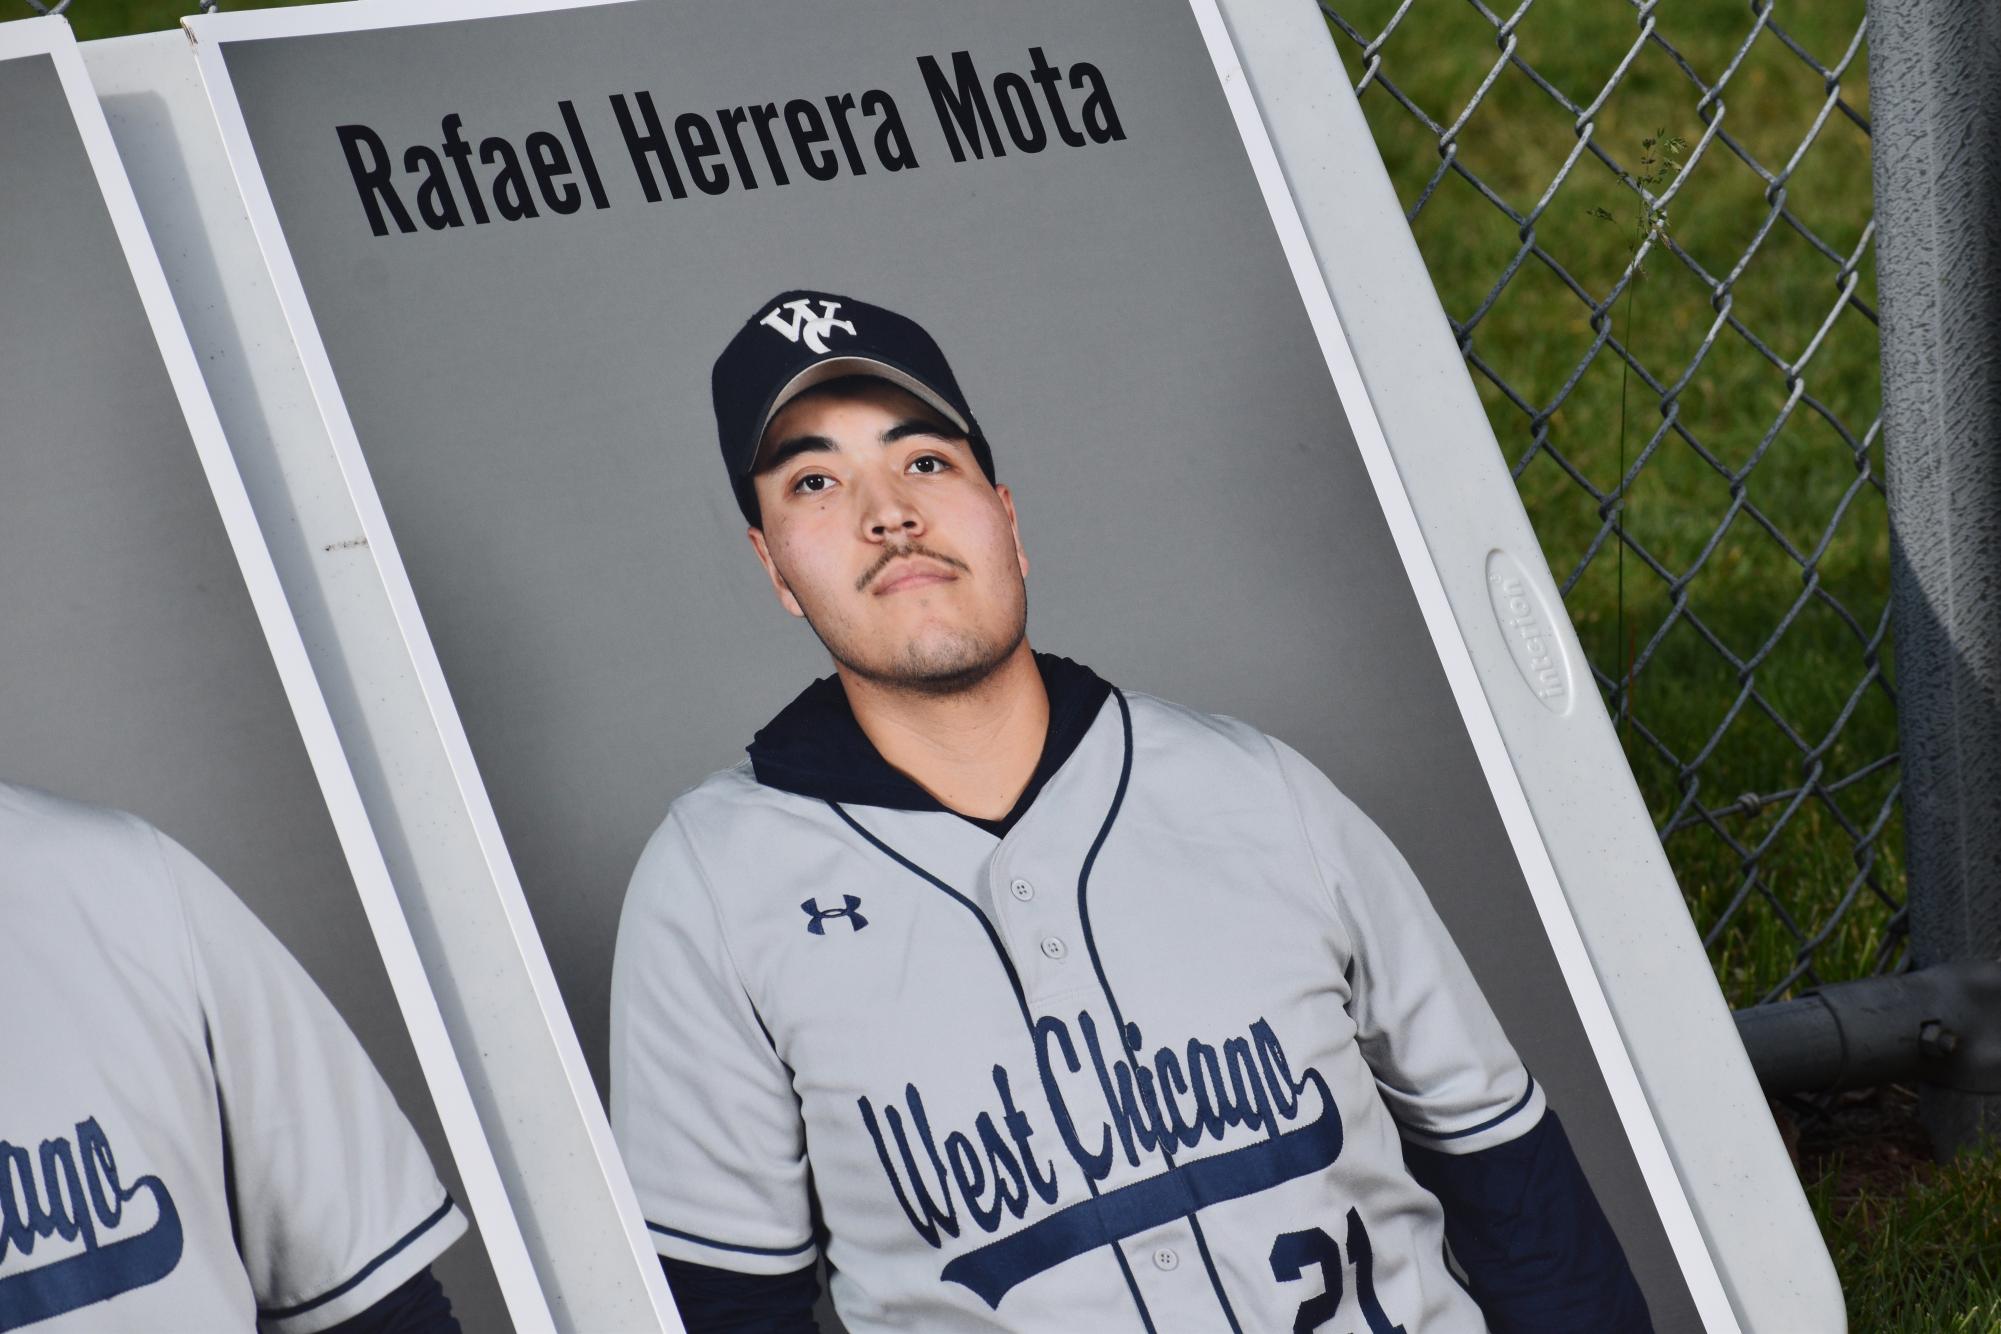 Herrera has been an integral part of the baseball team since joining in 2021.